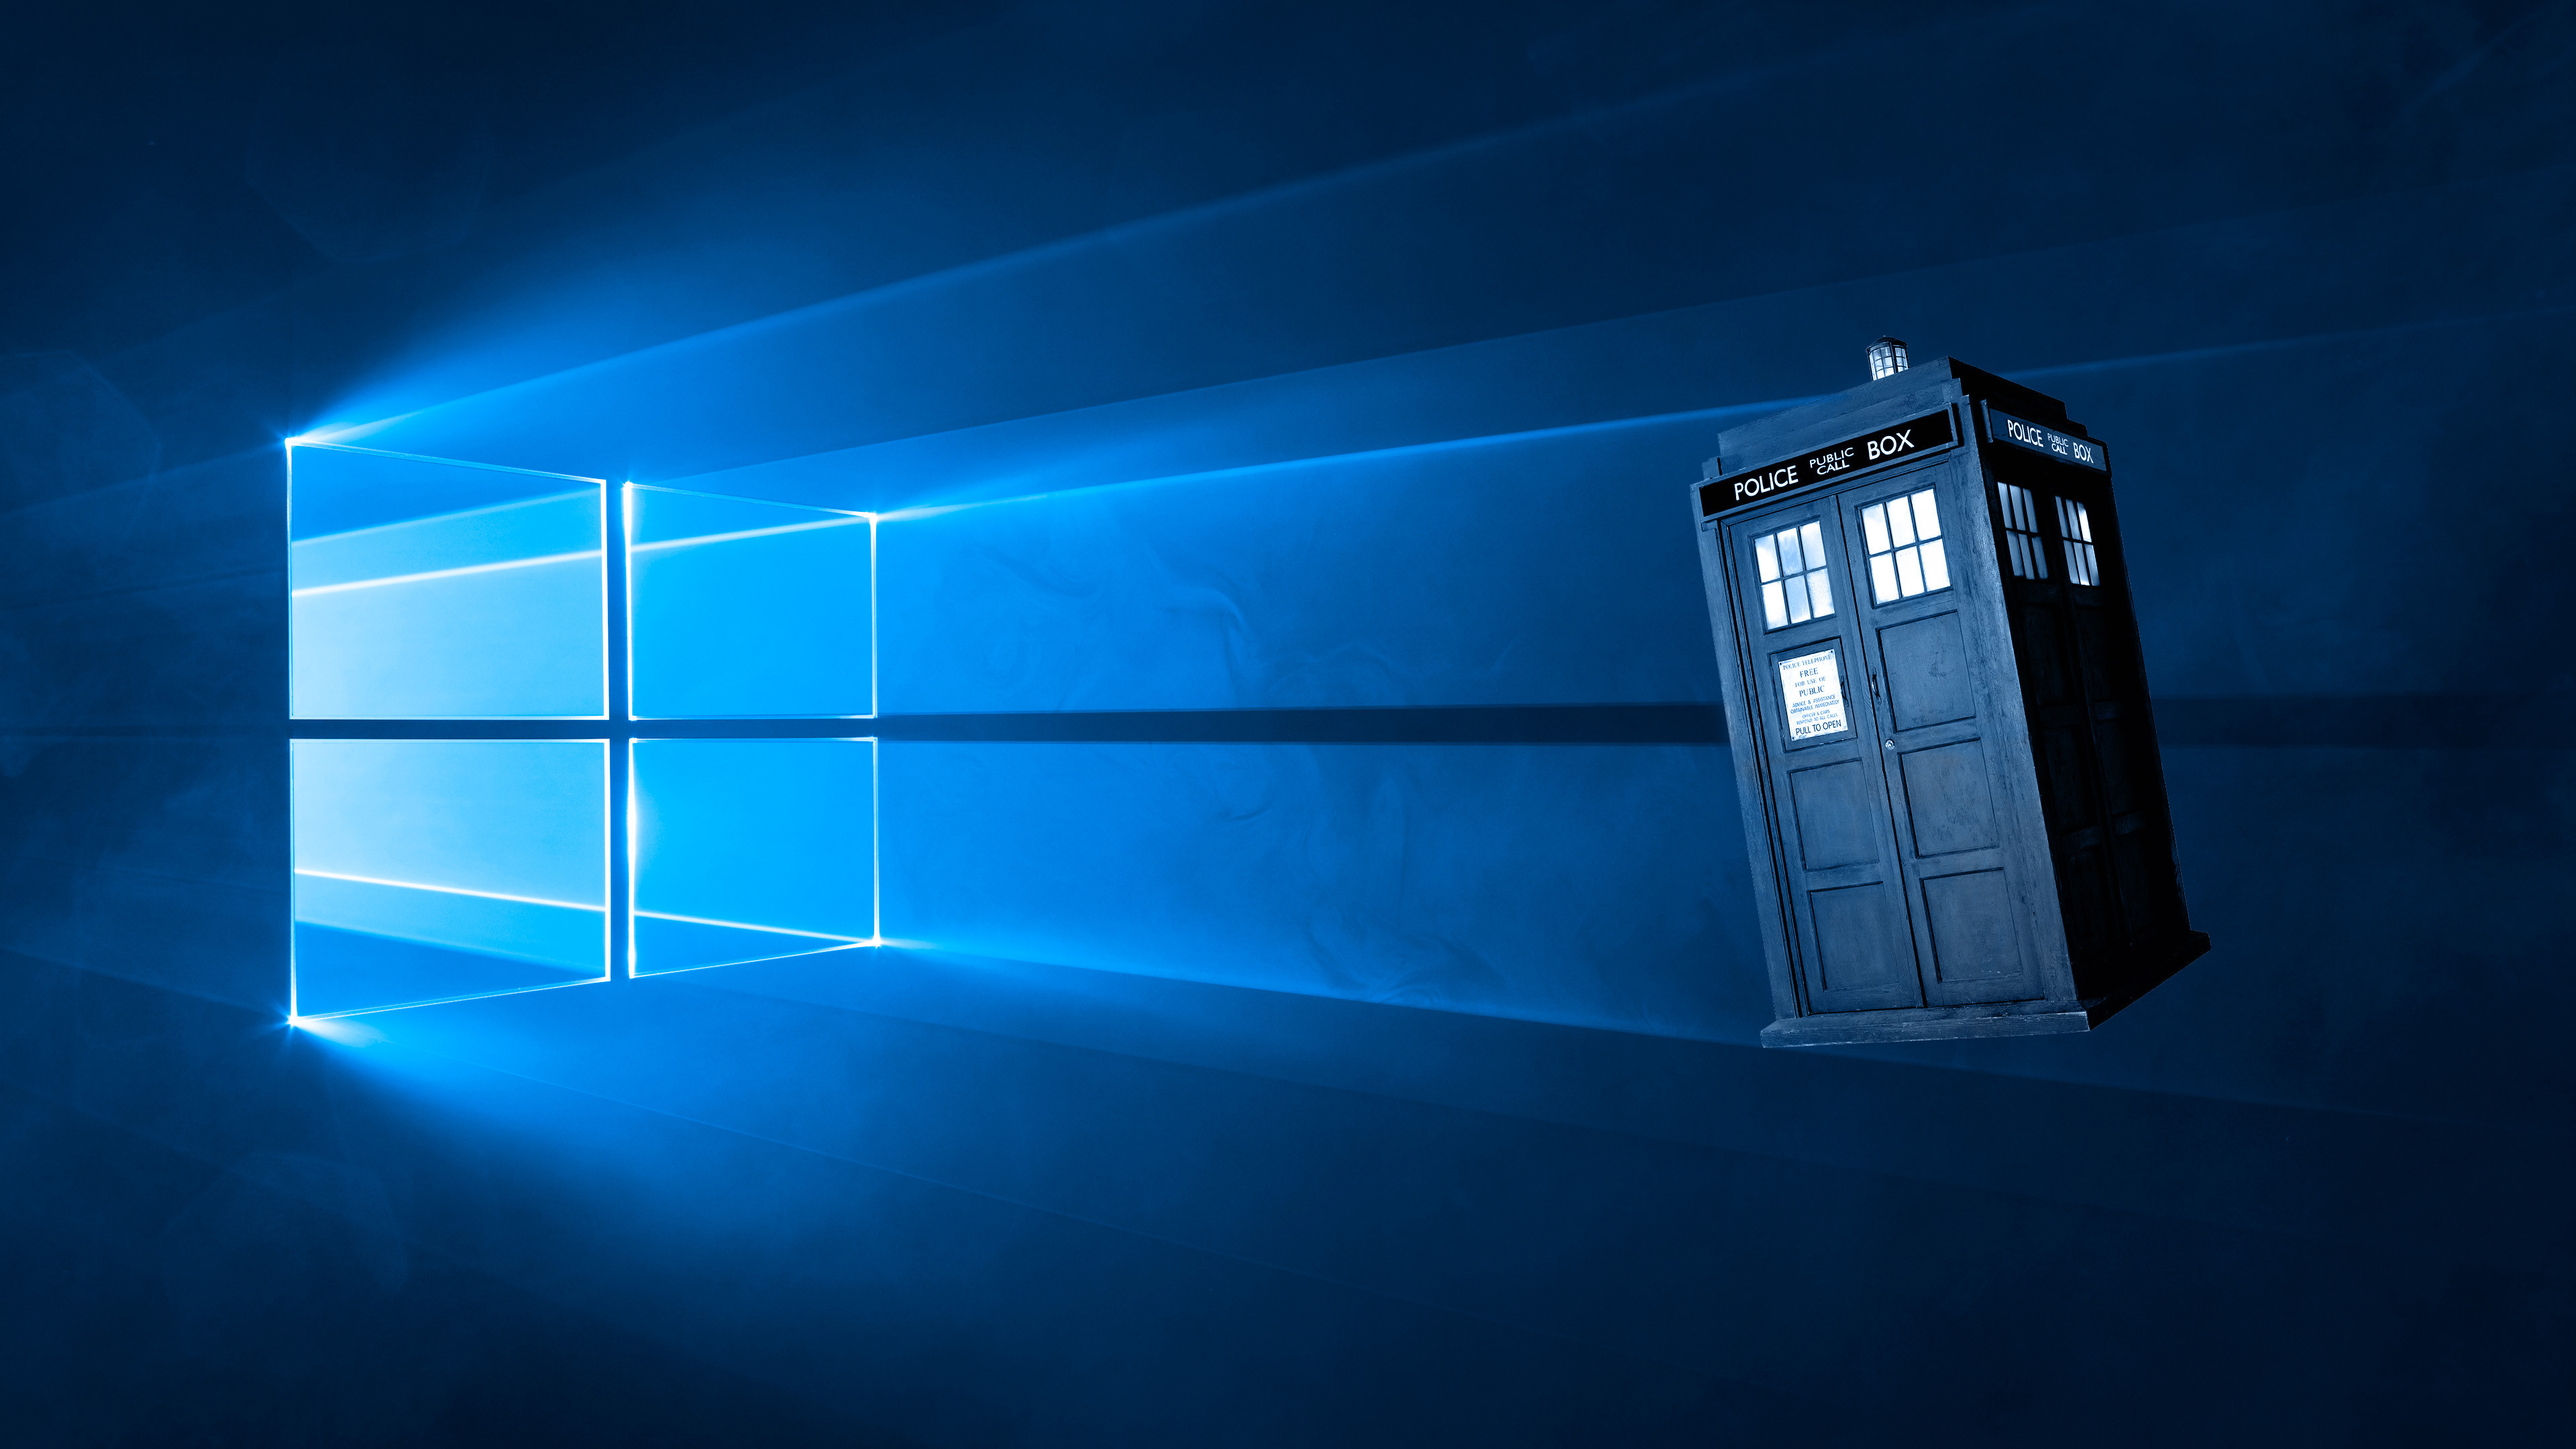 3840x2160 images tardis blue wallpapers windows wallpapers hd download free cool  background images mac windows 10 3840Ã2160 Wallpaper HD